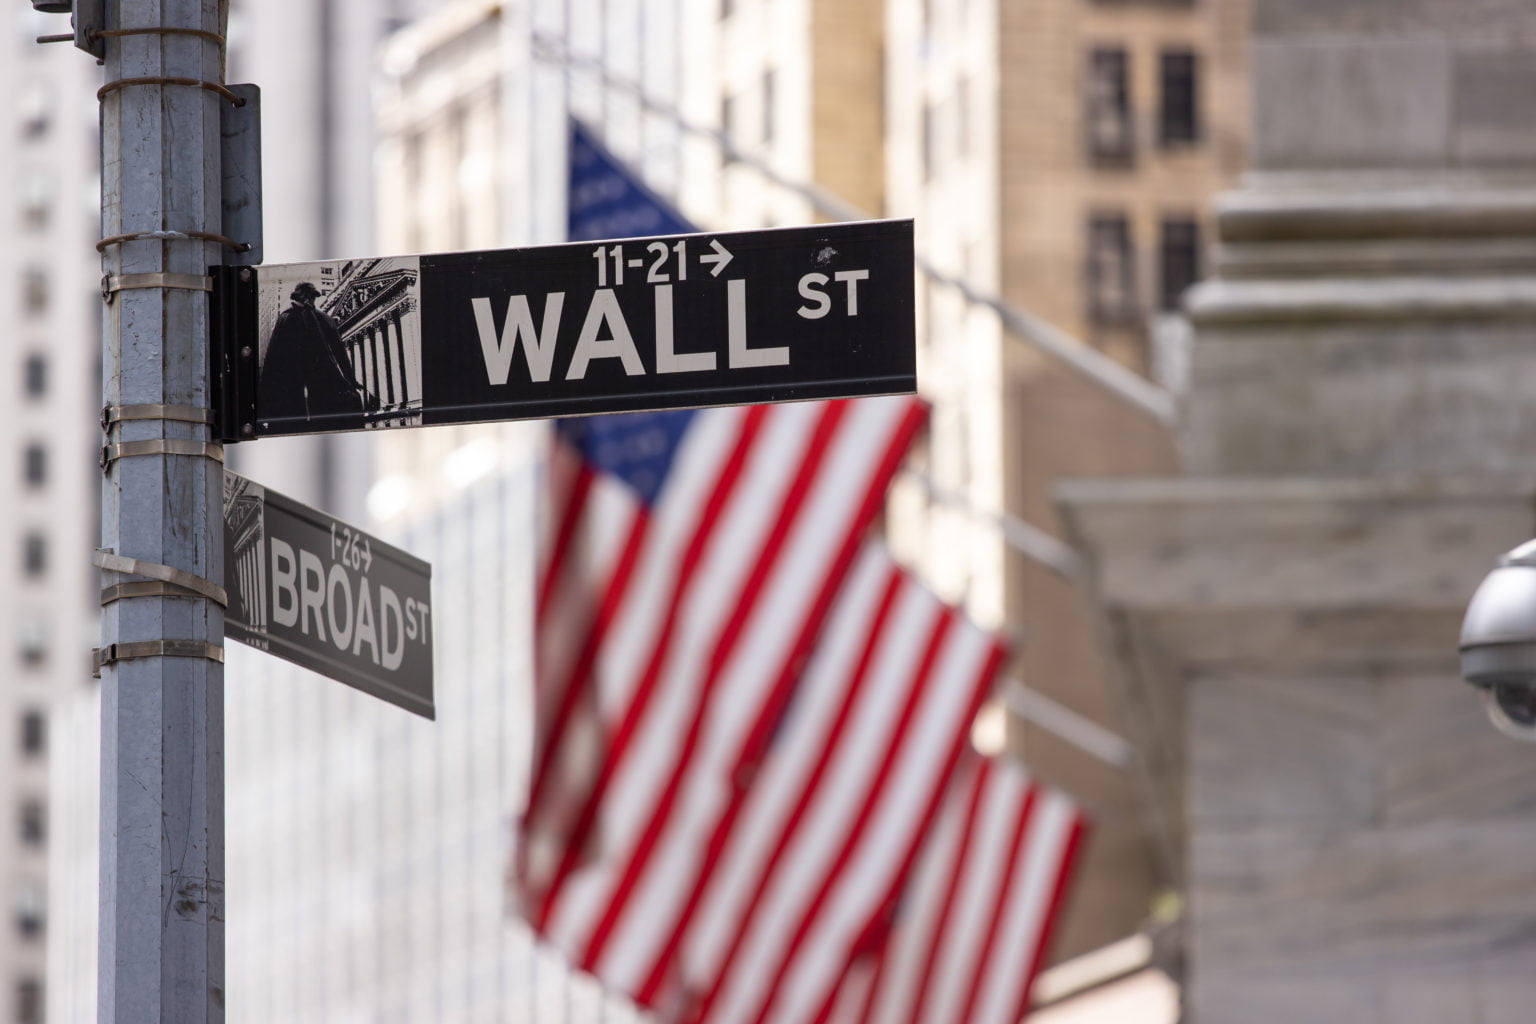 Wall Street street sign in New York City